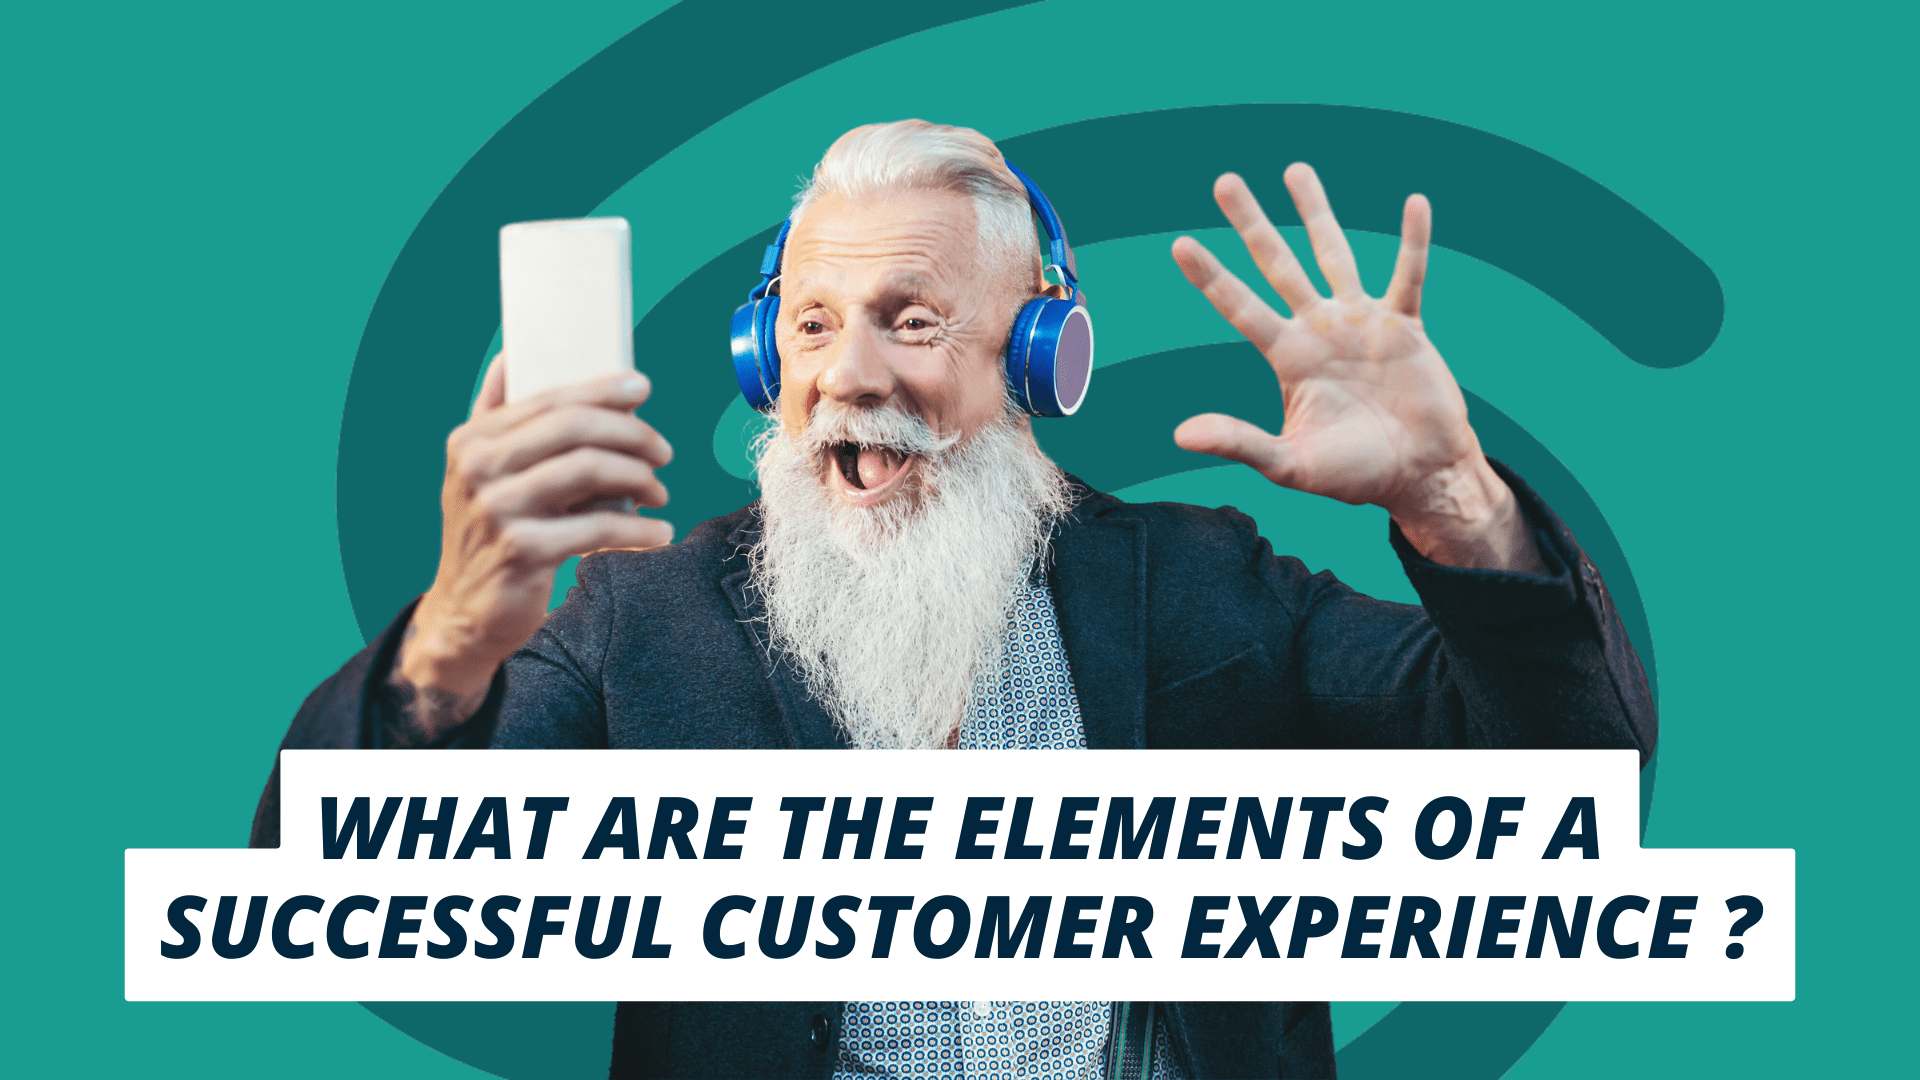 What makes for a successful customer experience?